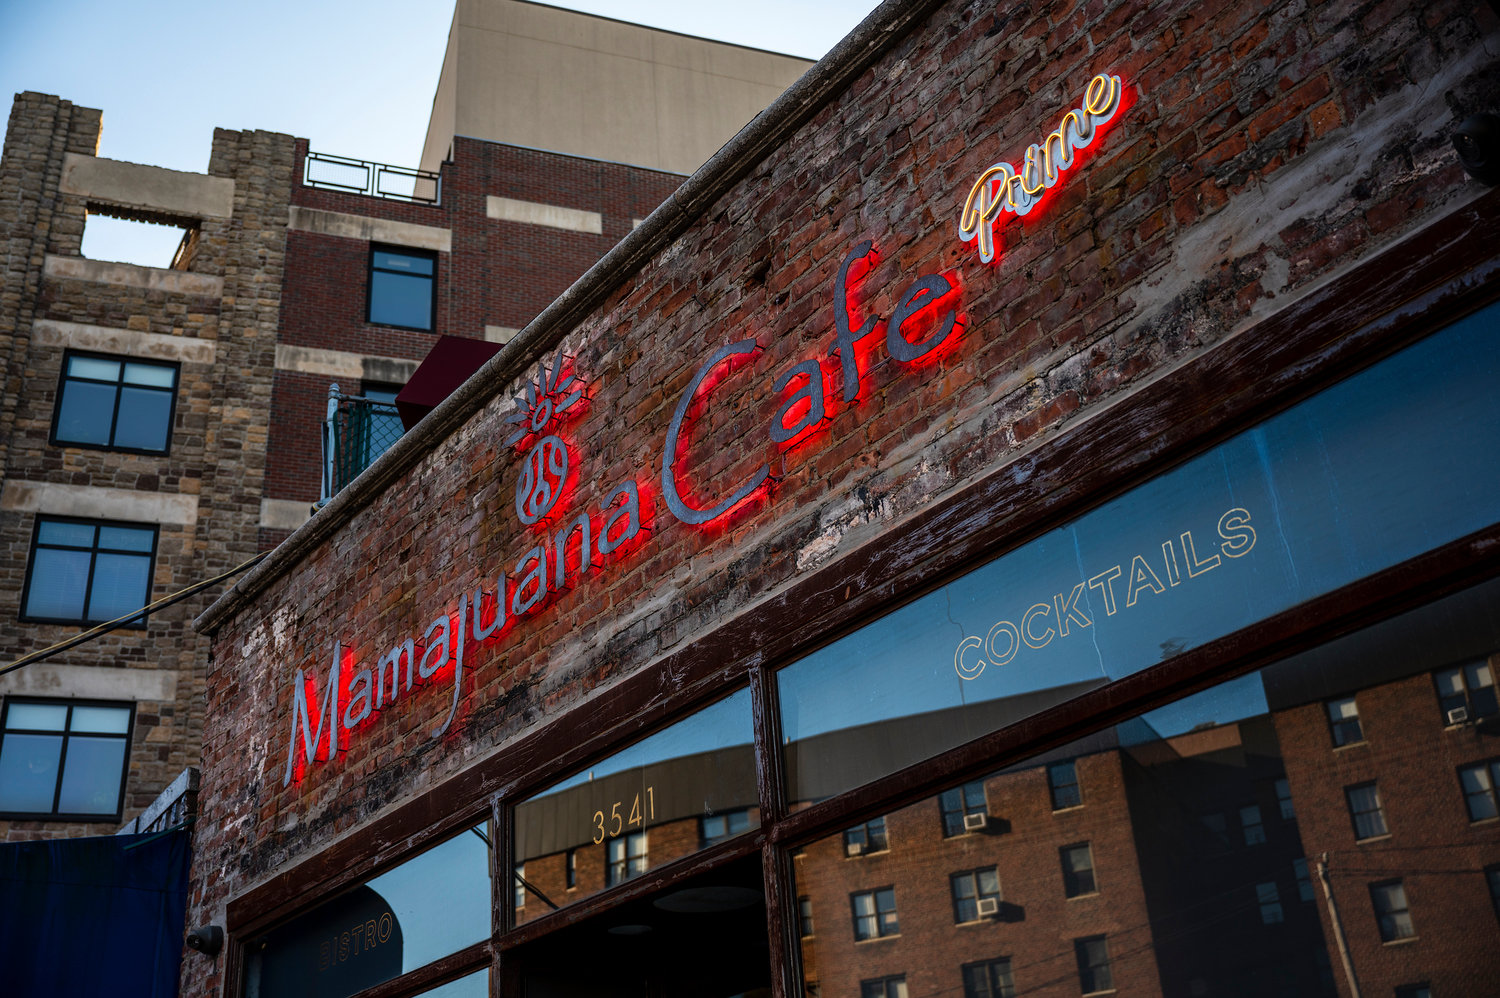 Mamajuana Café, a Latin American restaurant with several locations in and around New York City, has now officially opened at 3541 Riverdale Ave. The location’s owner, Iggy Khoury, also operated the last eatery to occupy that space: The Hill Bistro.